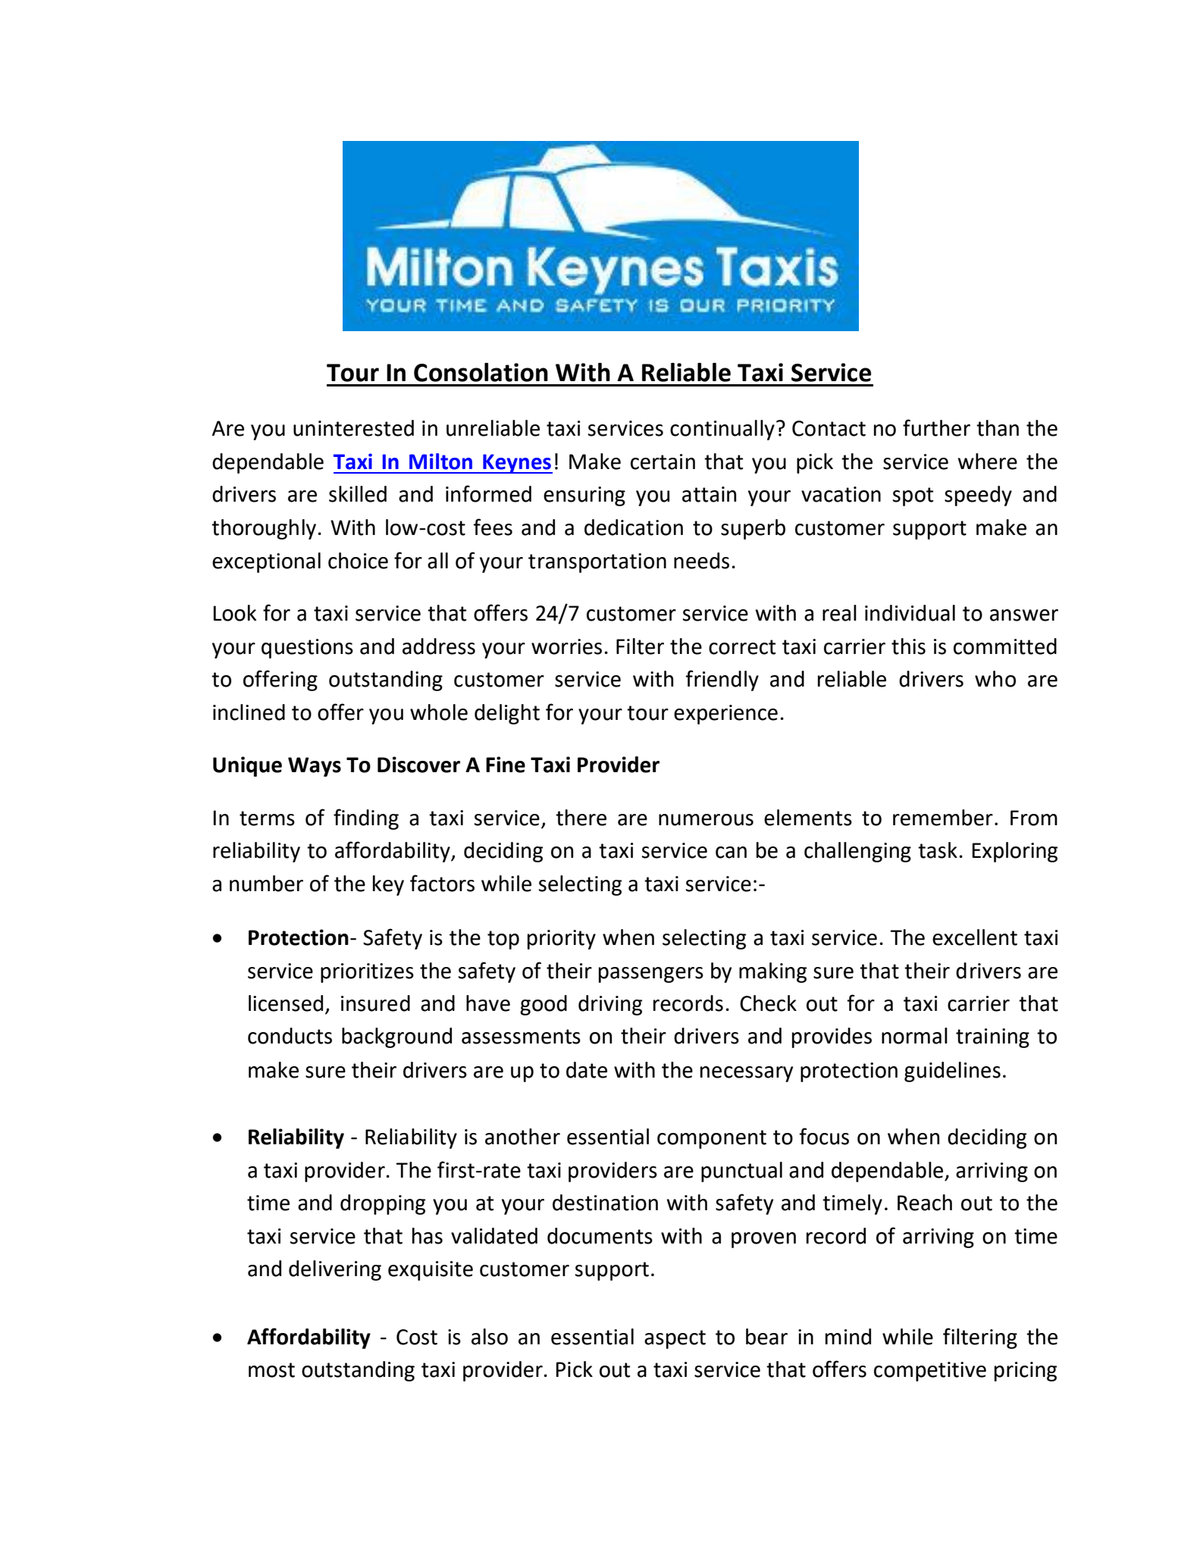 Dropbox - Tour In Consolation With A Reliable Taxi Service.pdf - Simplify your life